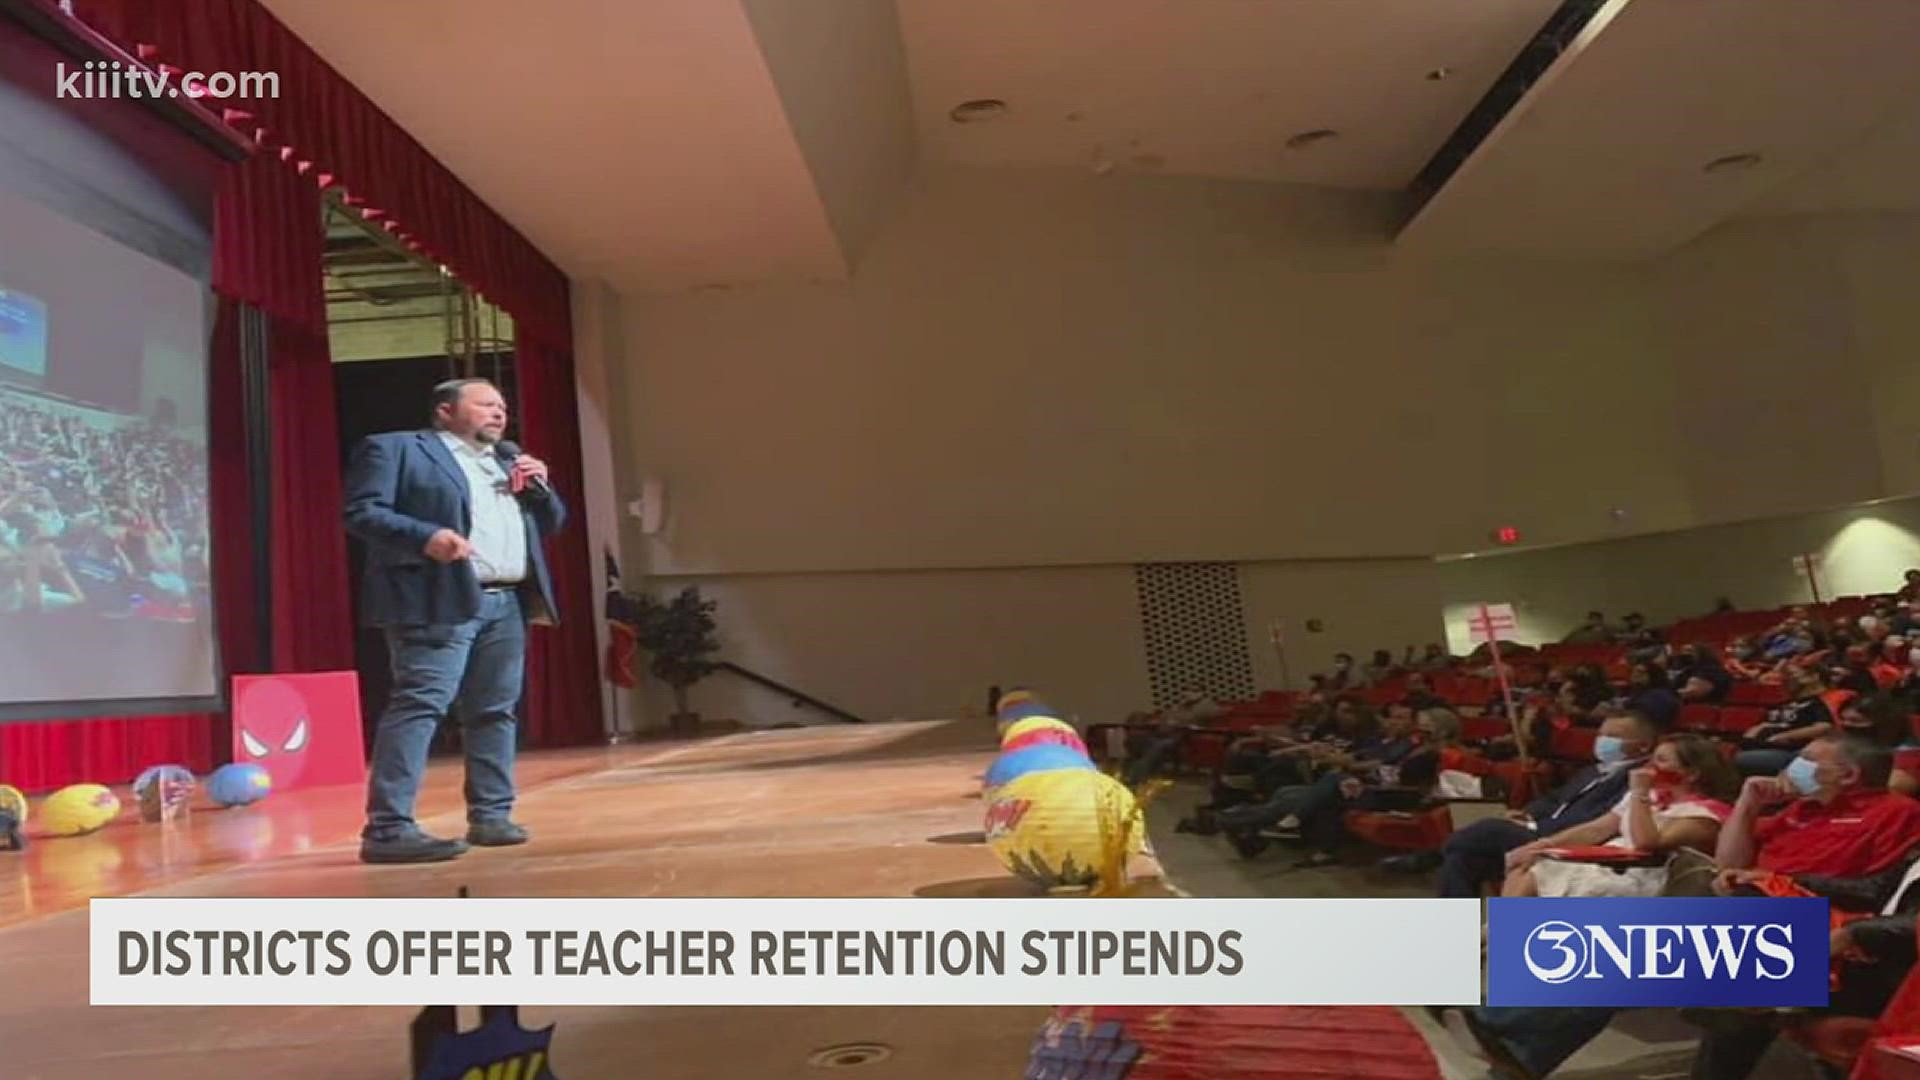 The Robstown Independent School District has offered teachers the biggest stipend.